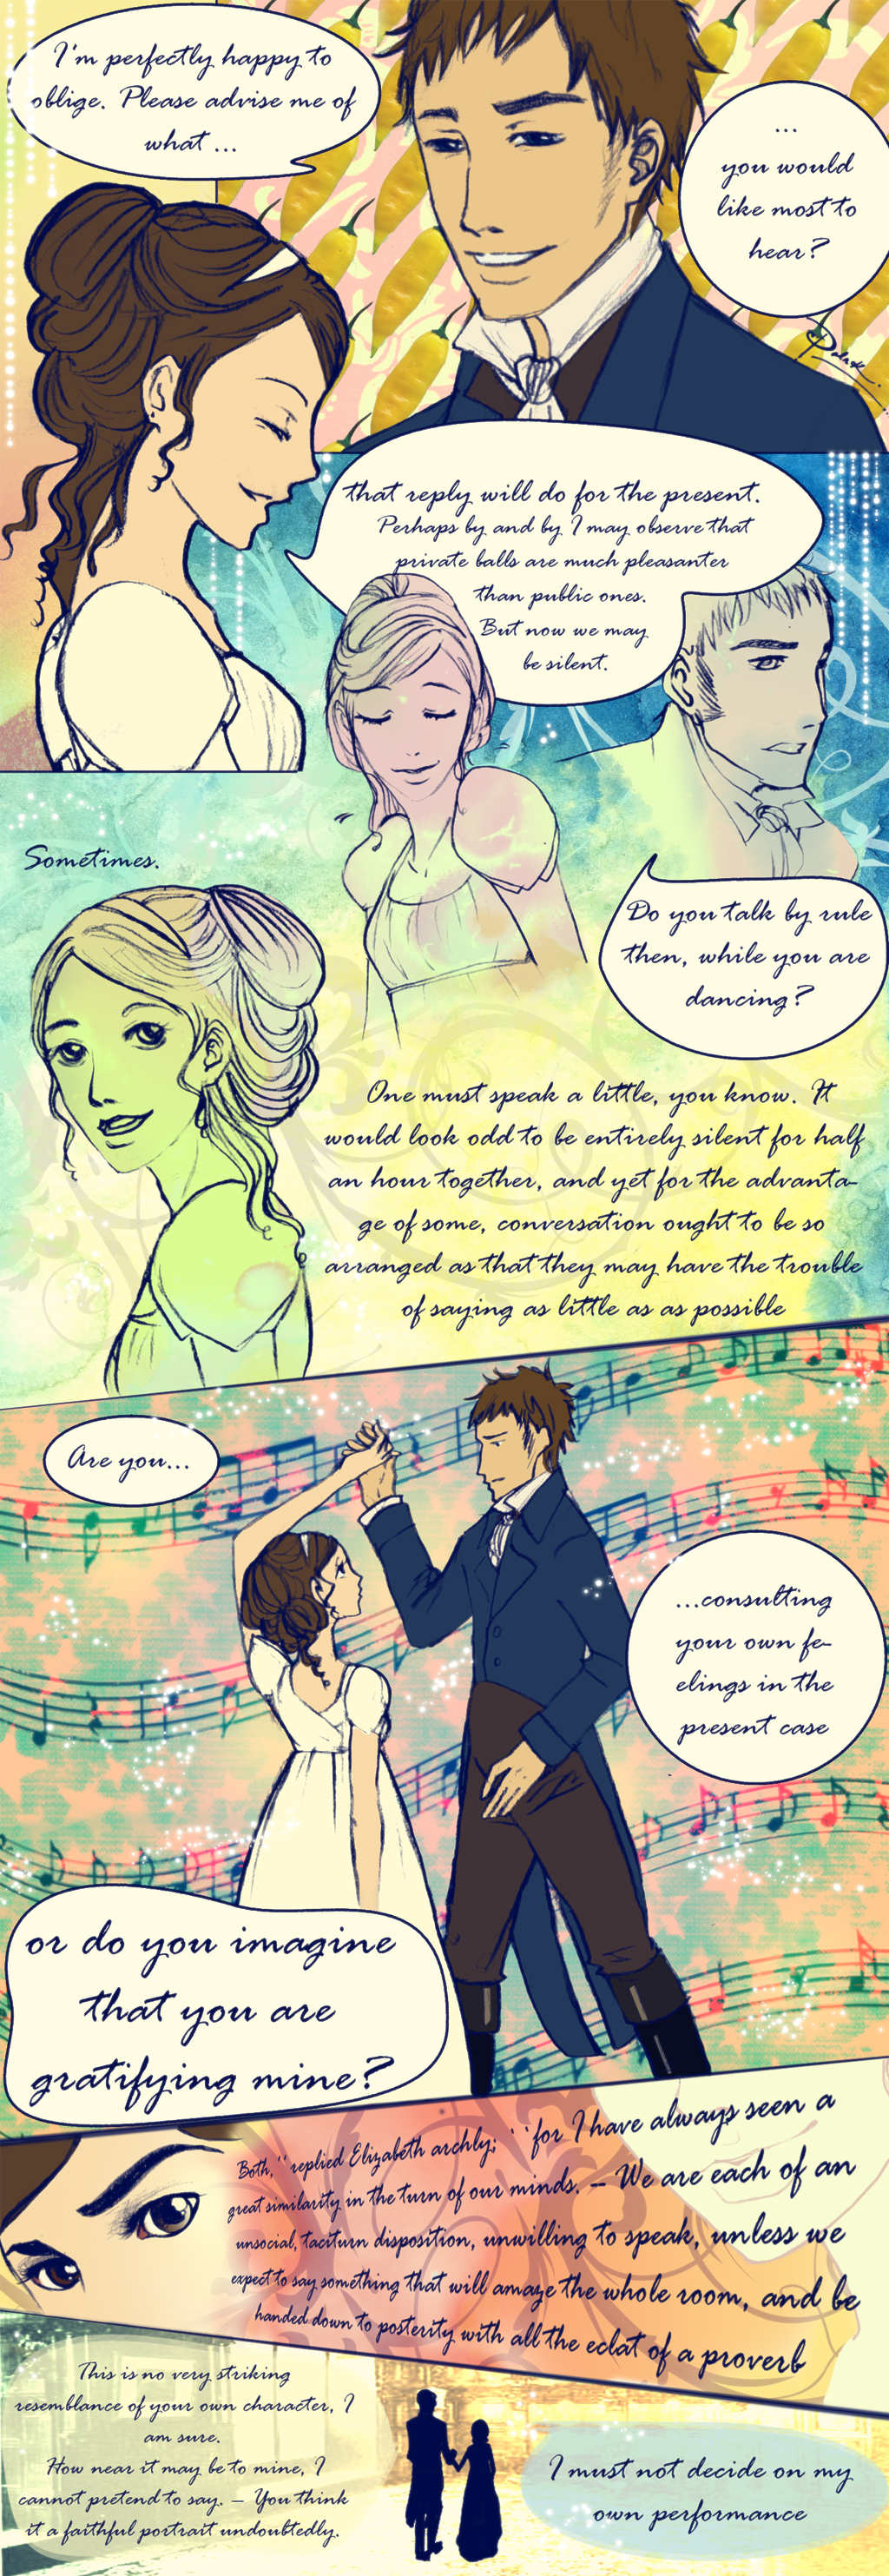 Netherfield Ball page 3